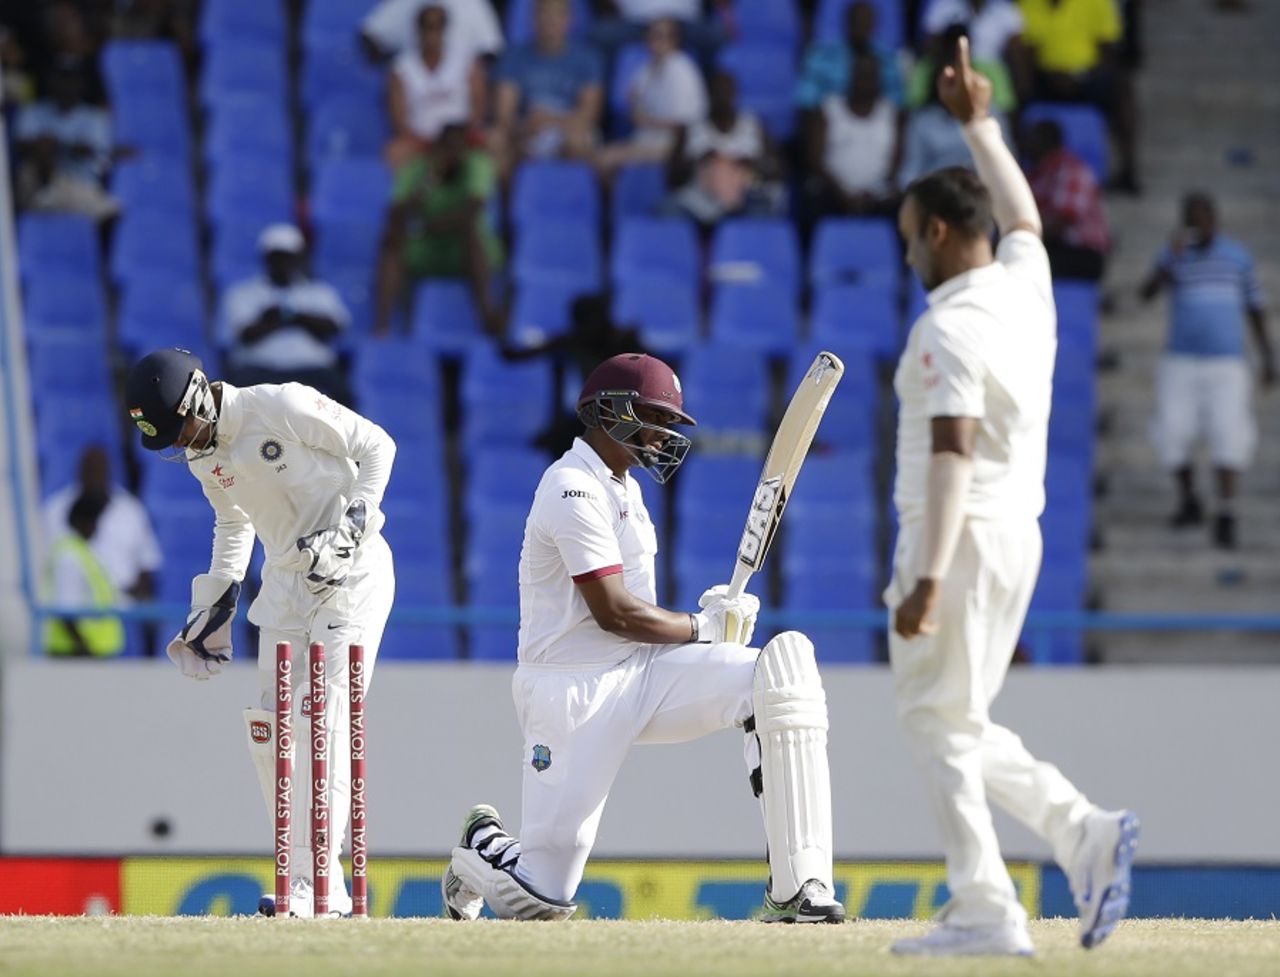 Shannon Gabriel was bowled by Amit Mishra for 2, West Indies v India, 1st Test, Antigua, 3rd day, July 23, 2016